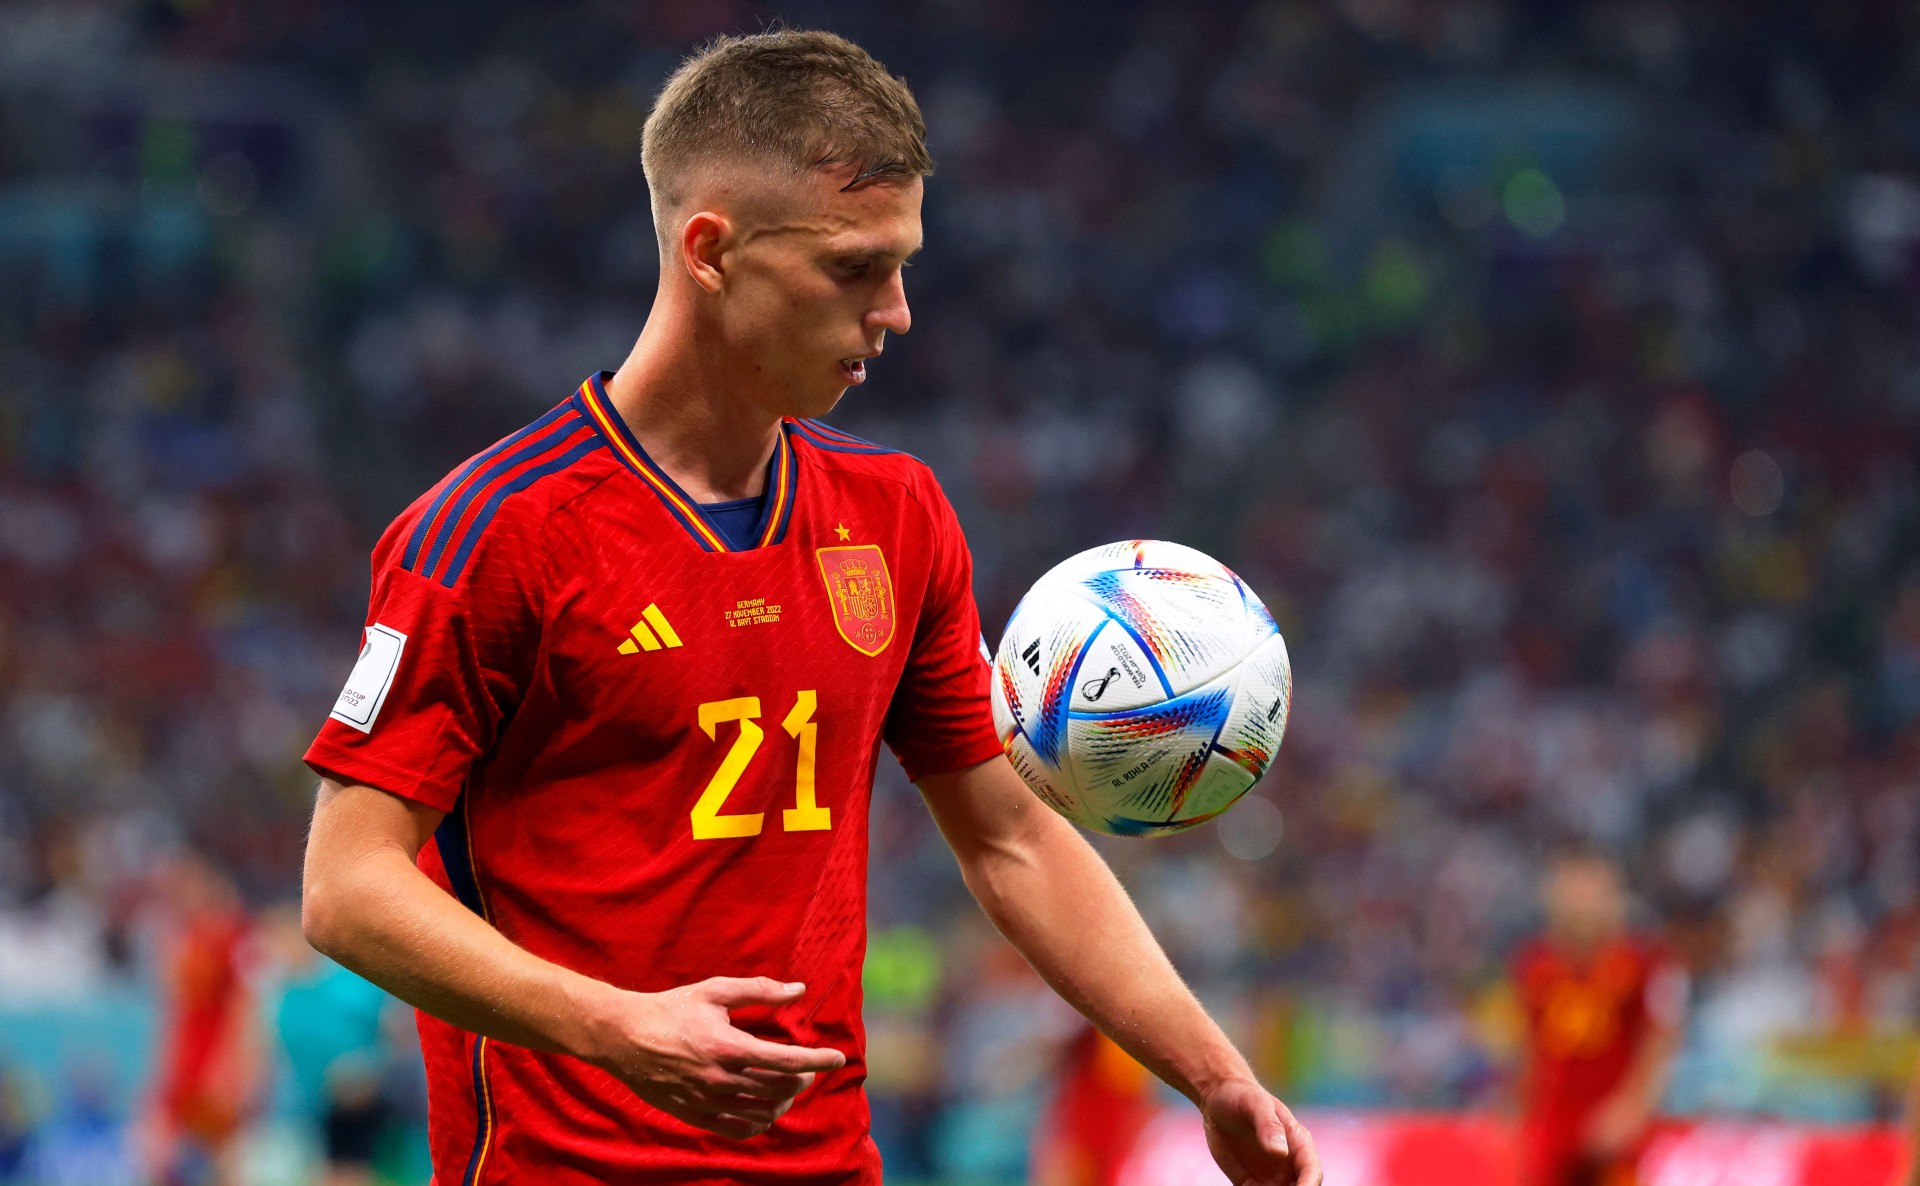 Barcelona meeting with Dani Olmo's father was regarding Manchester United target, not Spain star - Football España